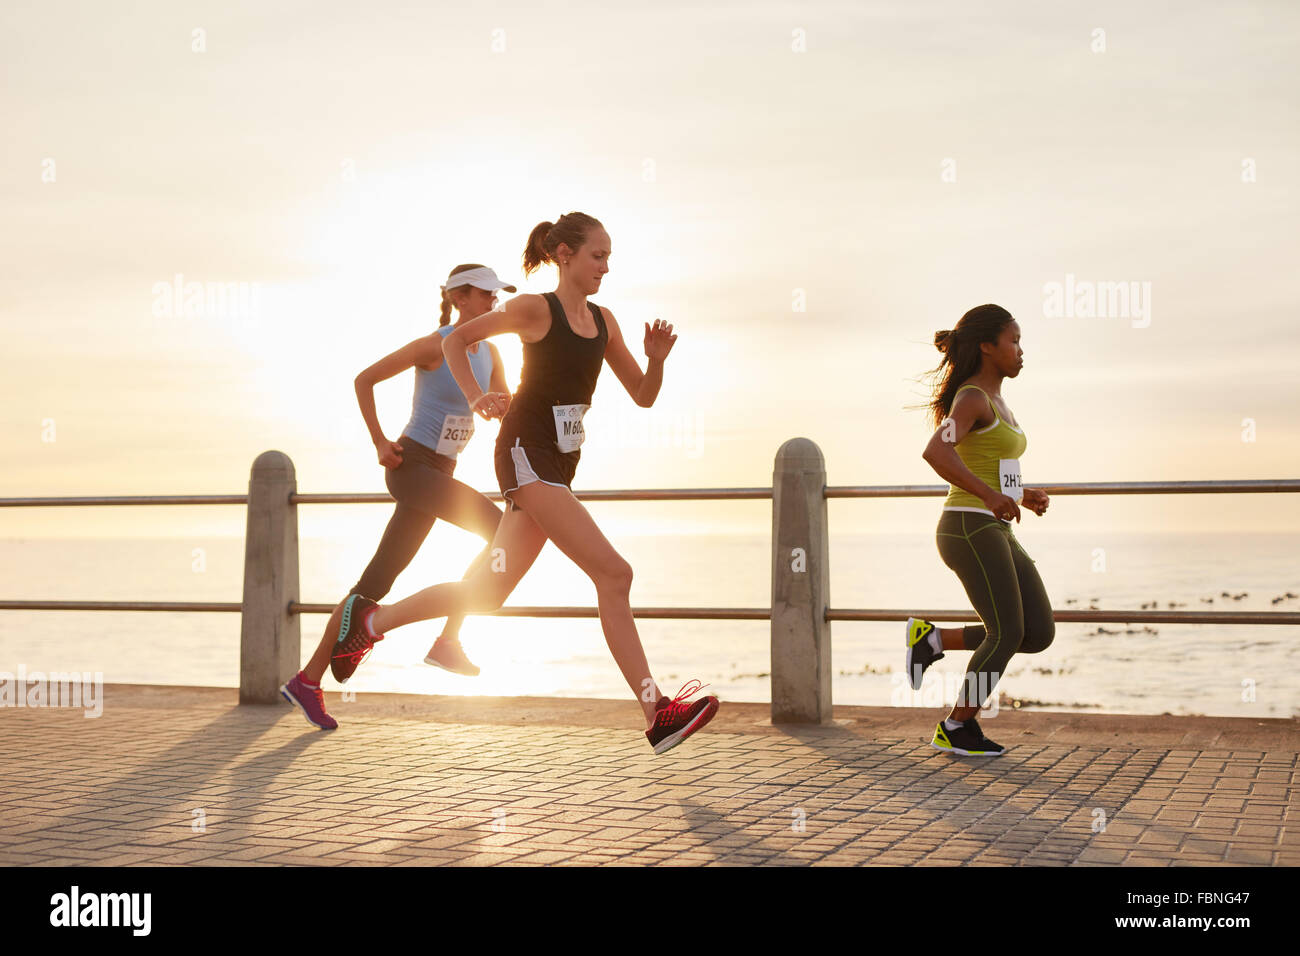 Three young women running on a road by the sea. Group of divers runners training on seaside promenade during sunset. Stock Photo